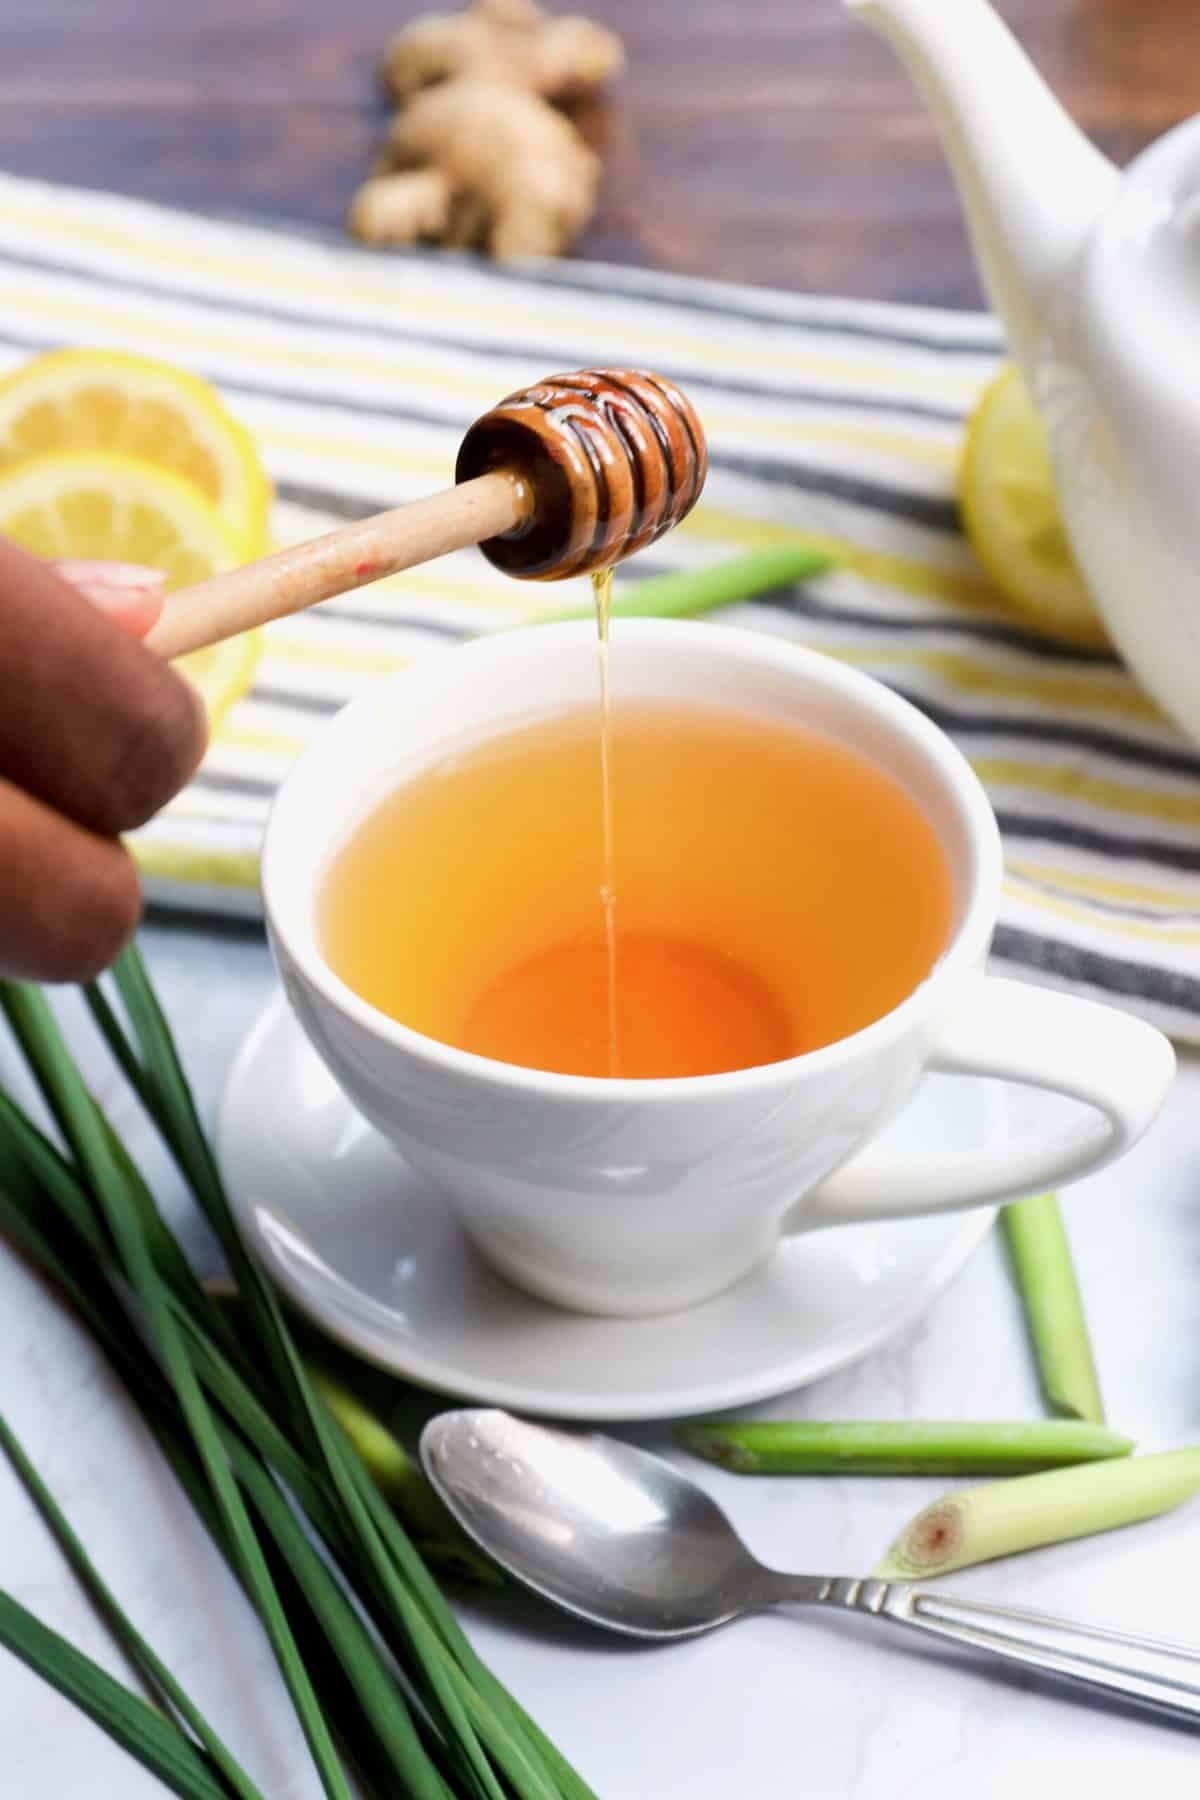 Drizzling honey in a deliciously hot cup of homemade lemongrass tea